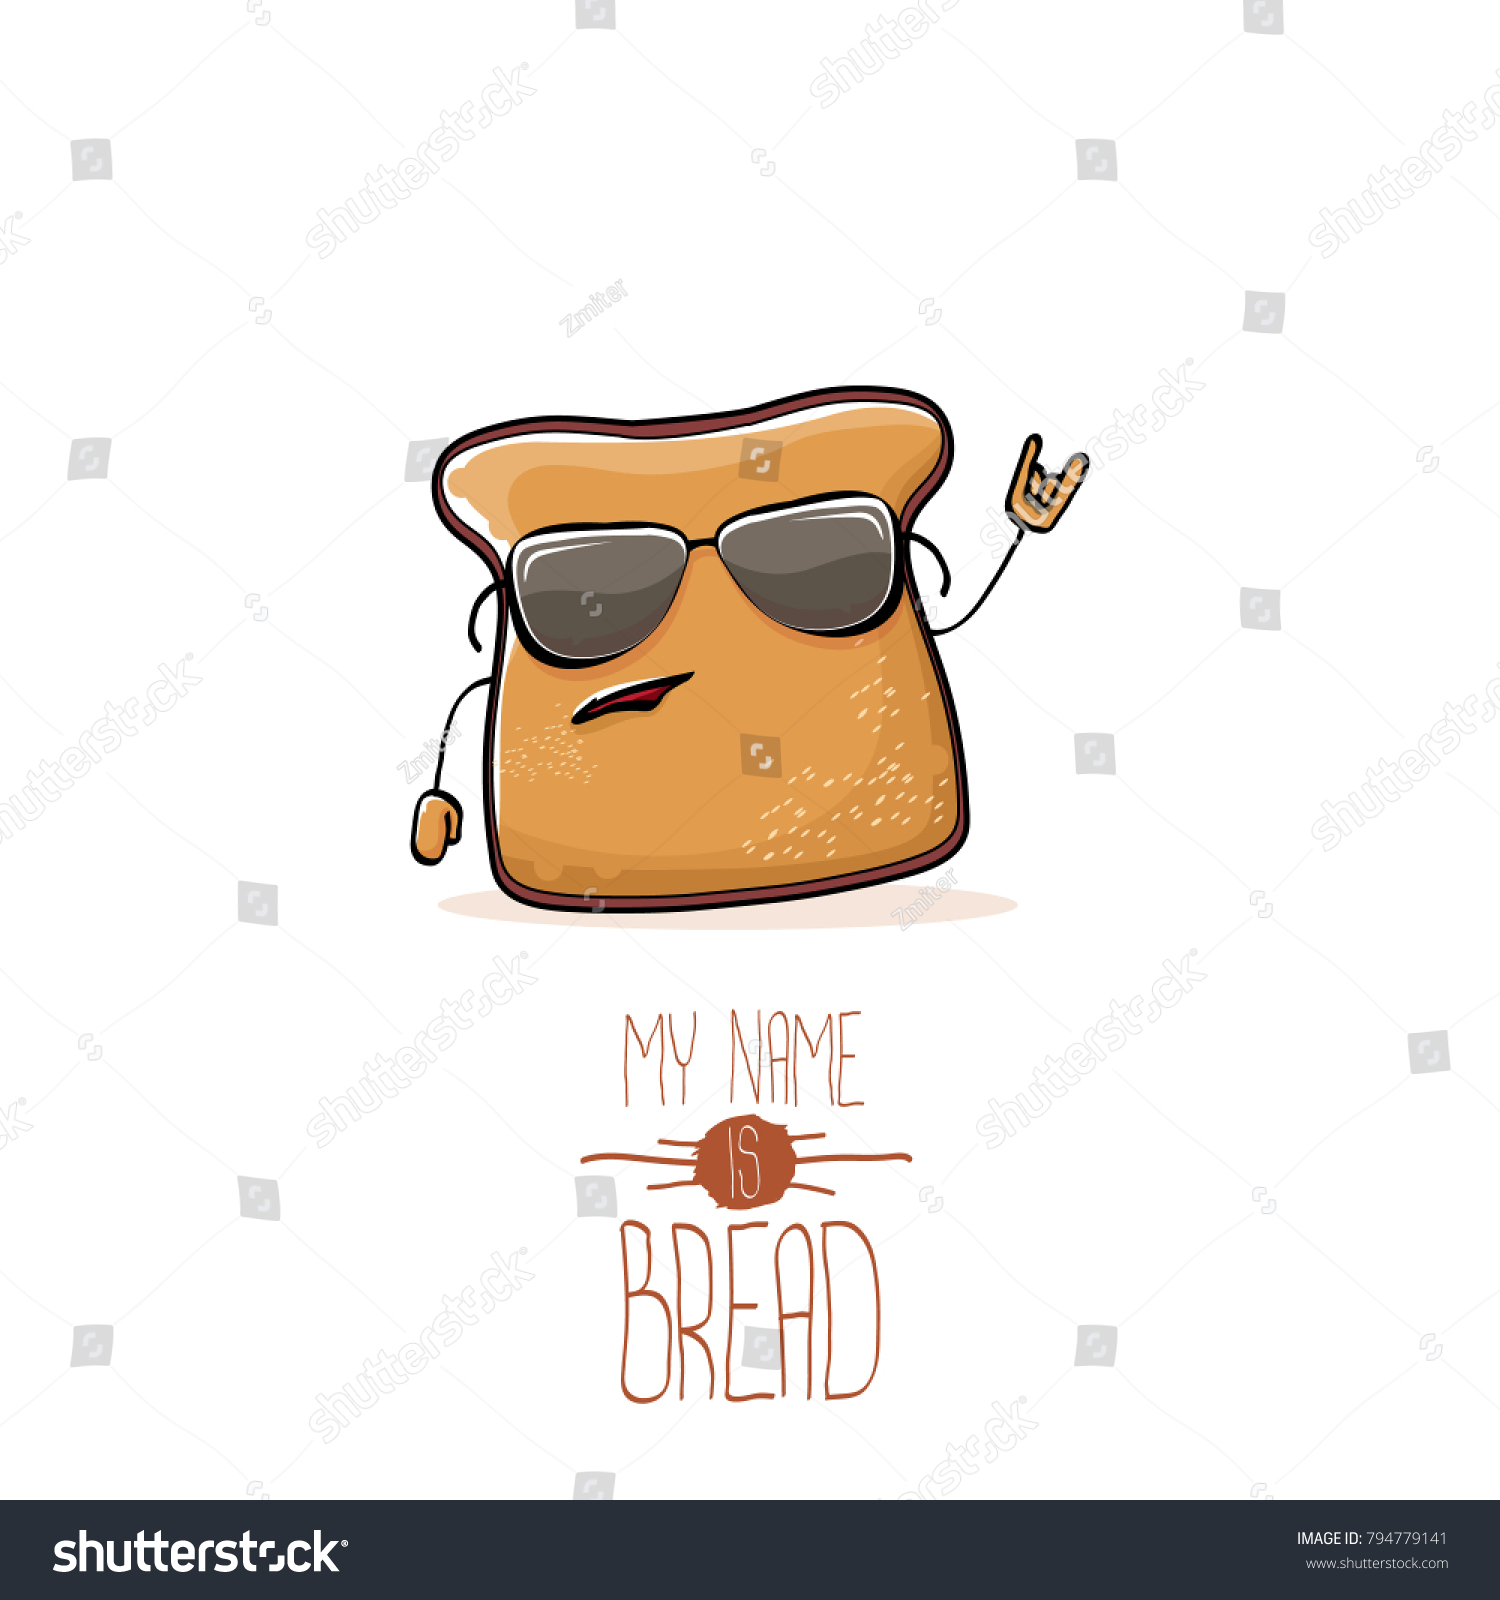 SVG of vector funny cartoon cute sliced bread character isolated on white background. My name is bread concept illustration. funky food character or bakery label mascot svg